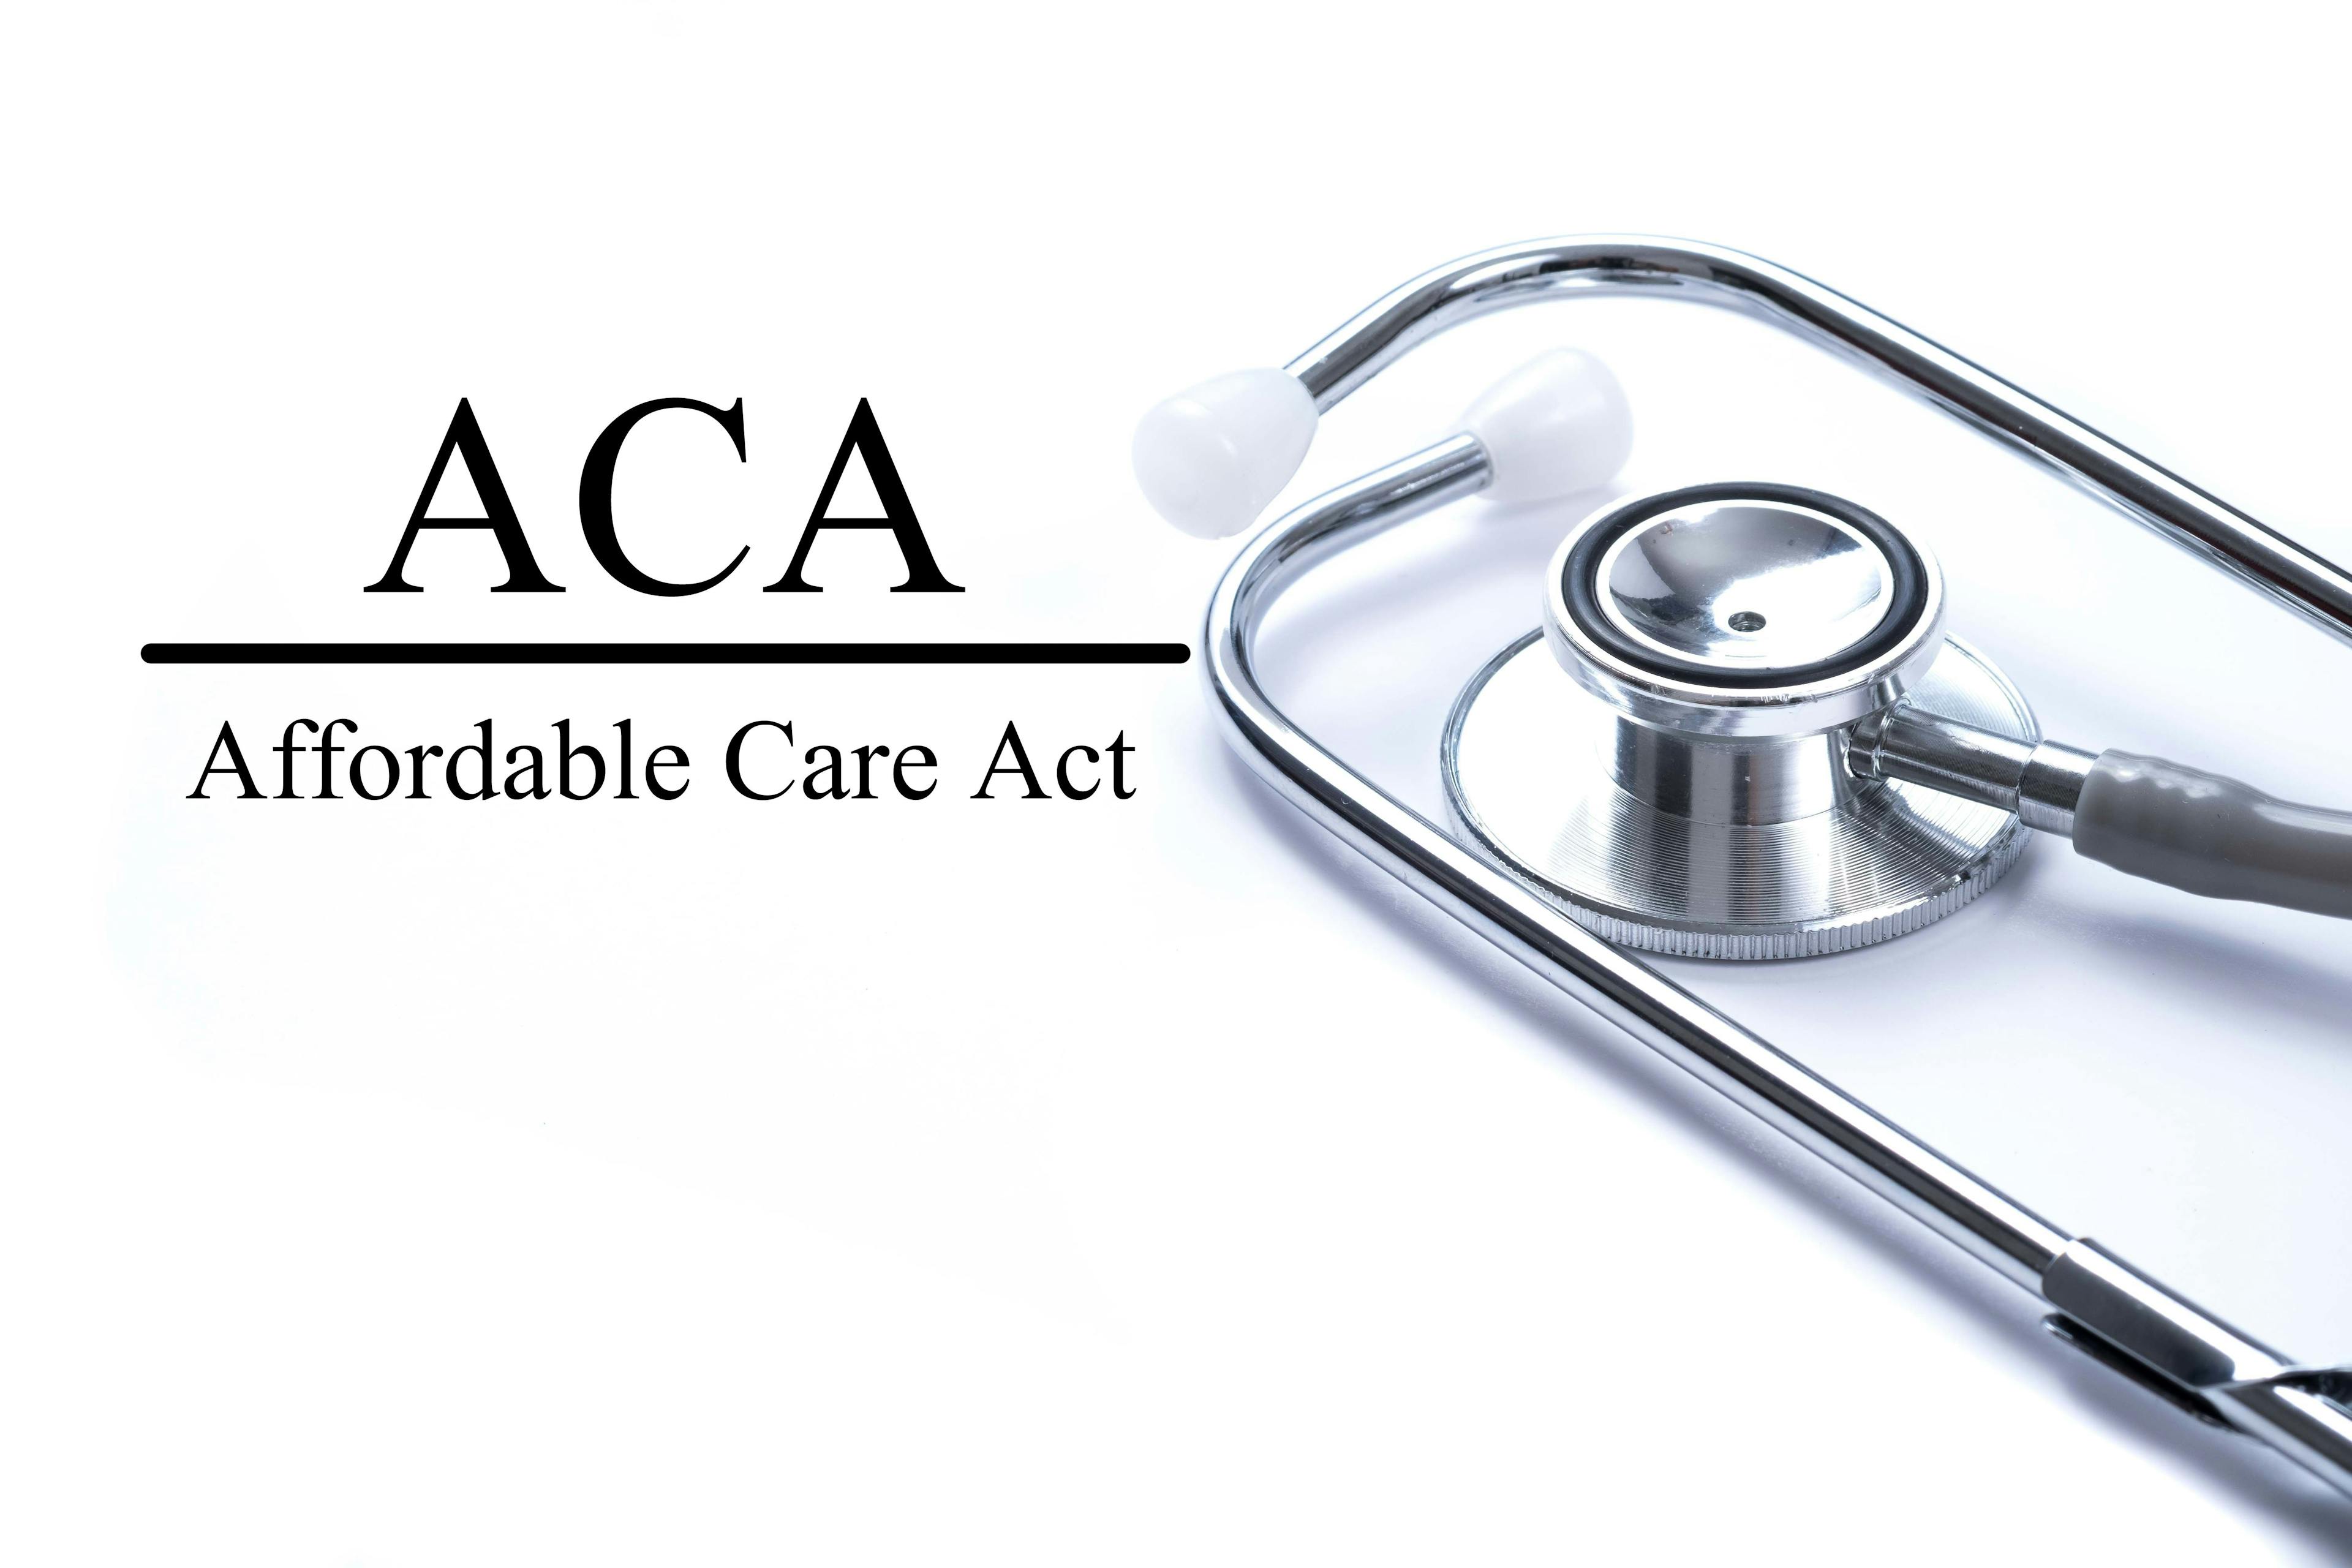 Appeals Court Temporarily Upholds Mandate For ACA Preventive Services